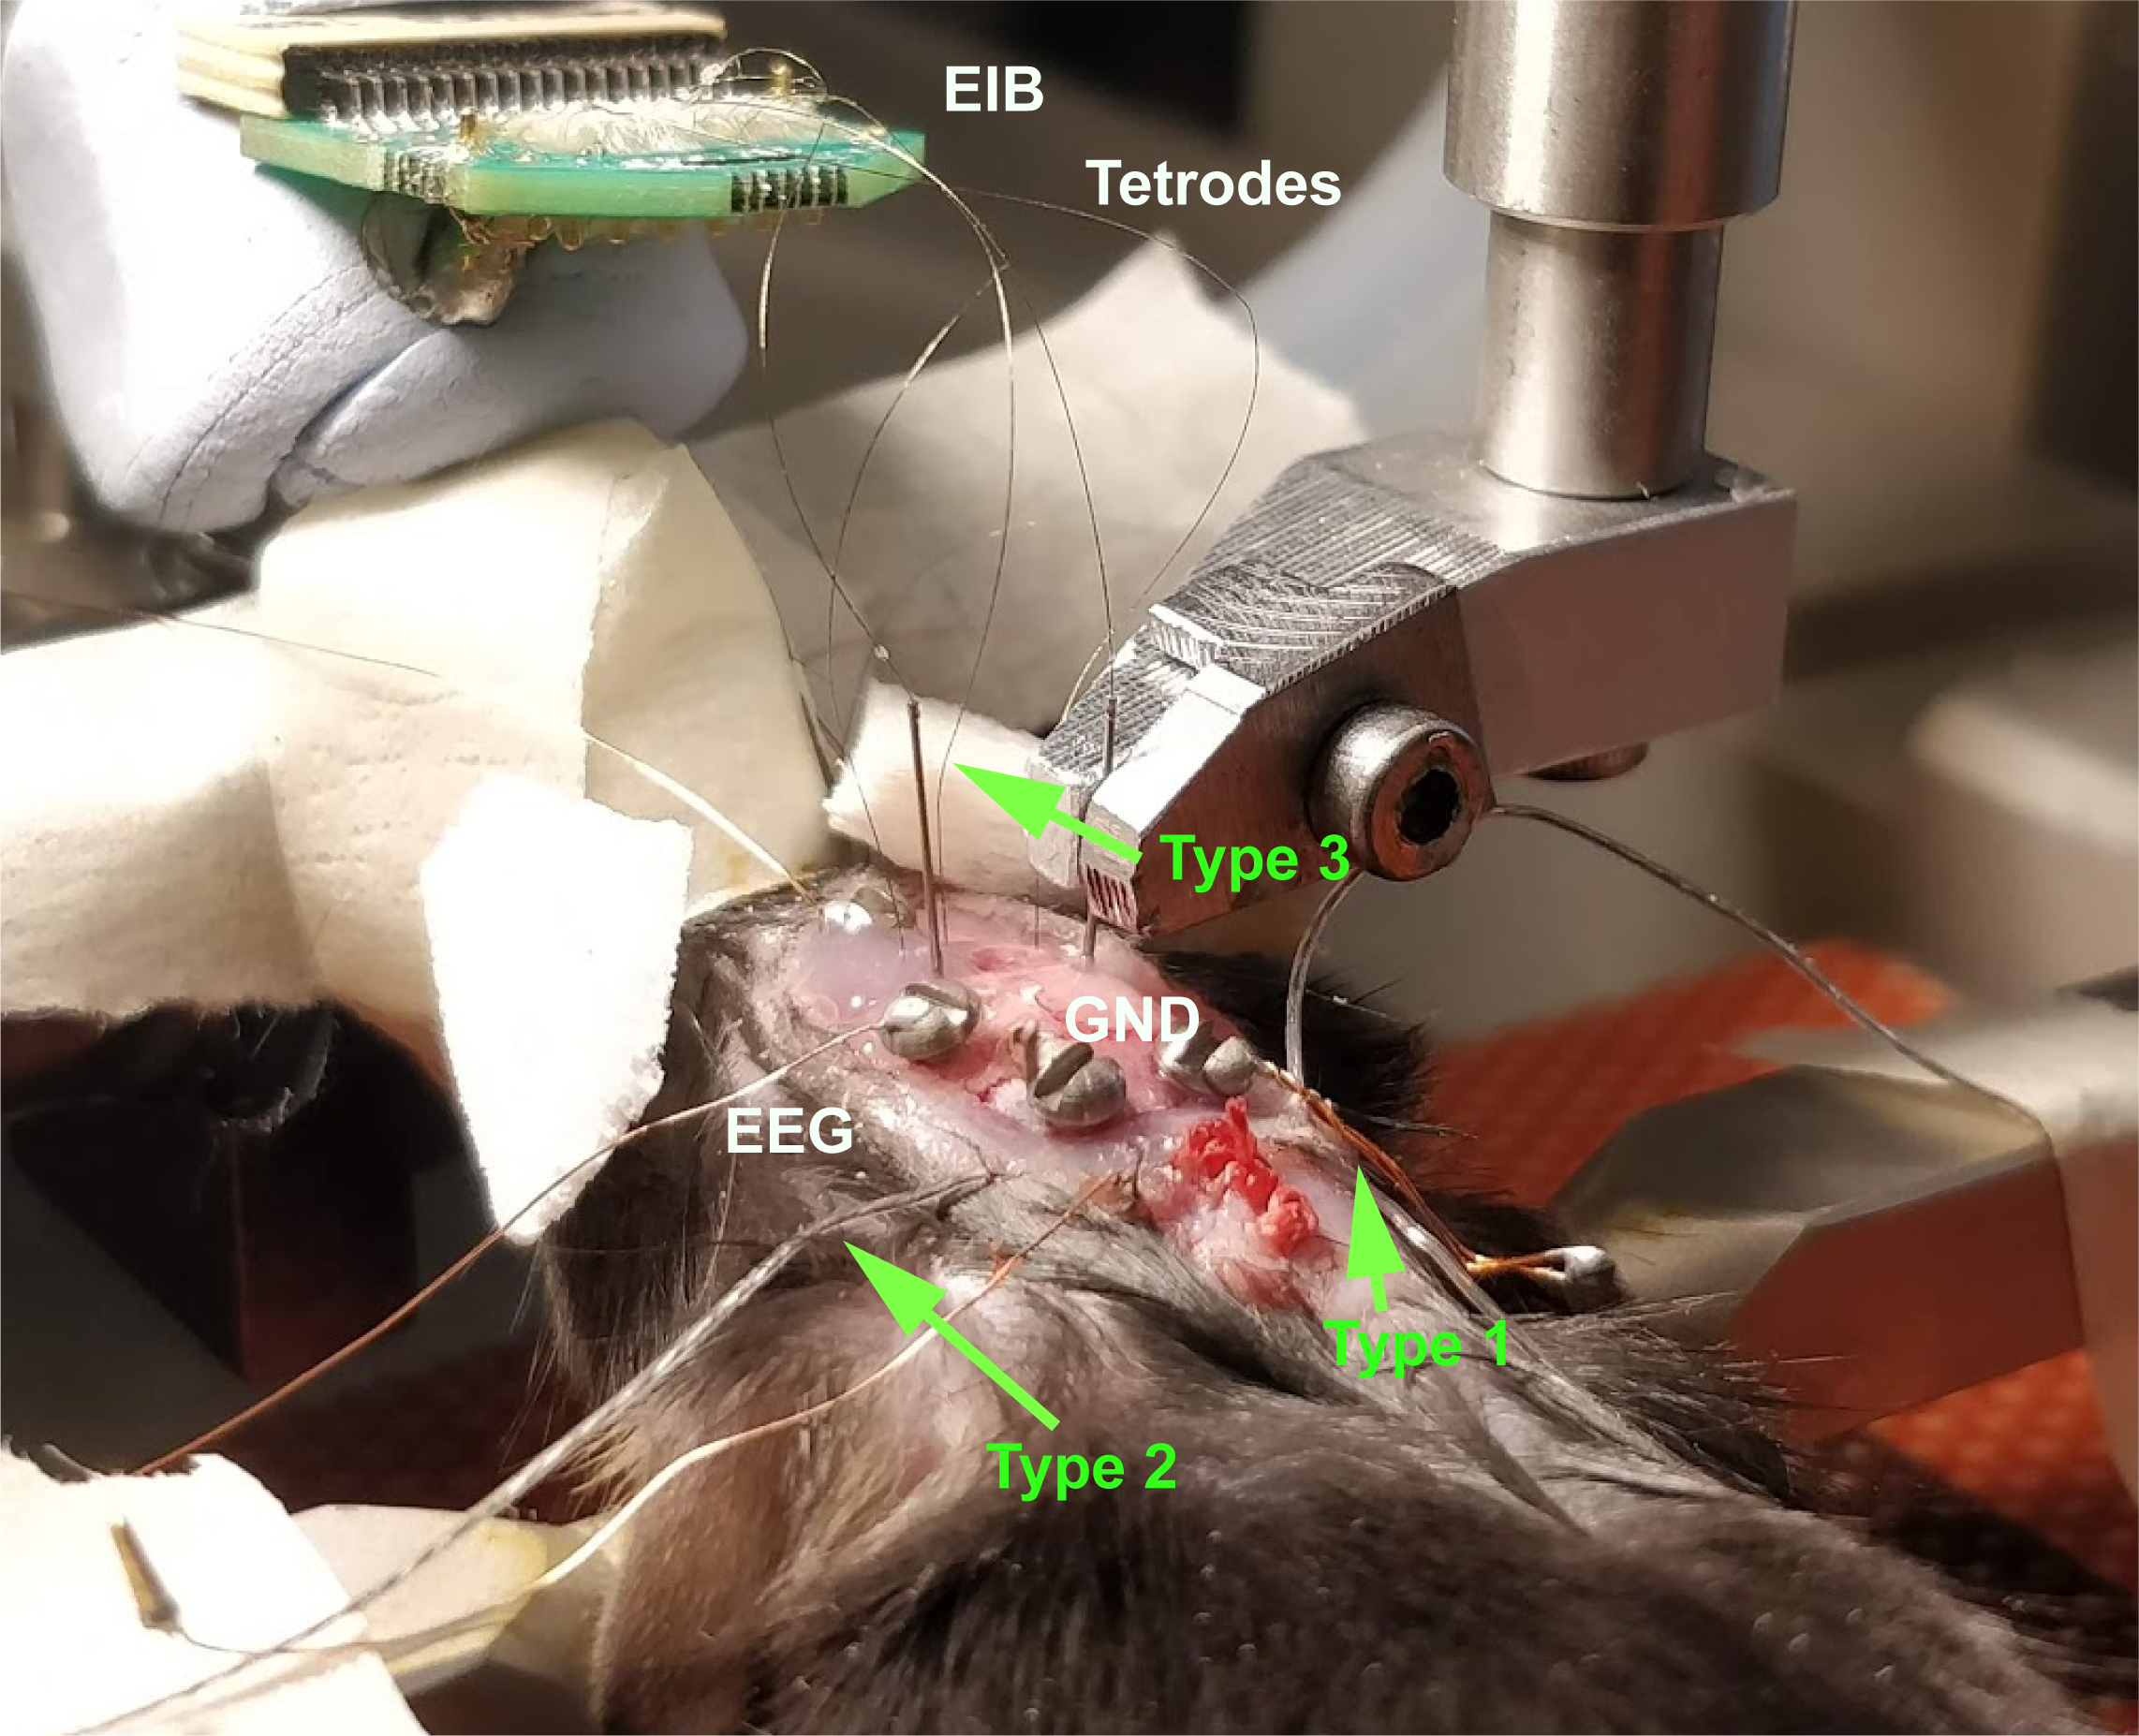 The Tips and Tricks of Soldering to build Chronic Implants for in vivo Electrophysiology in Rodents